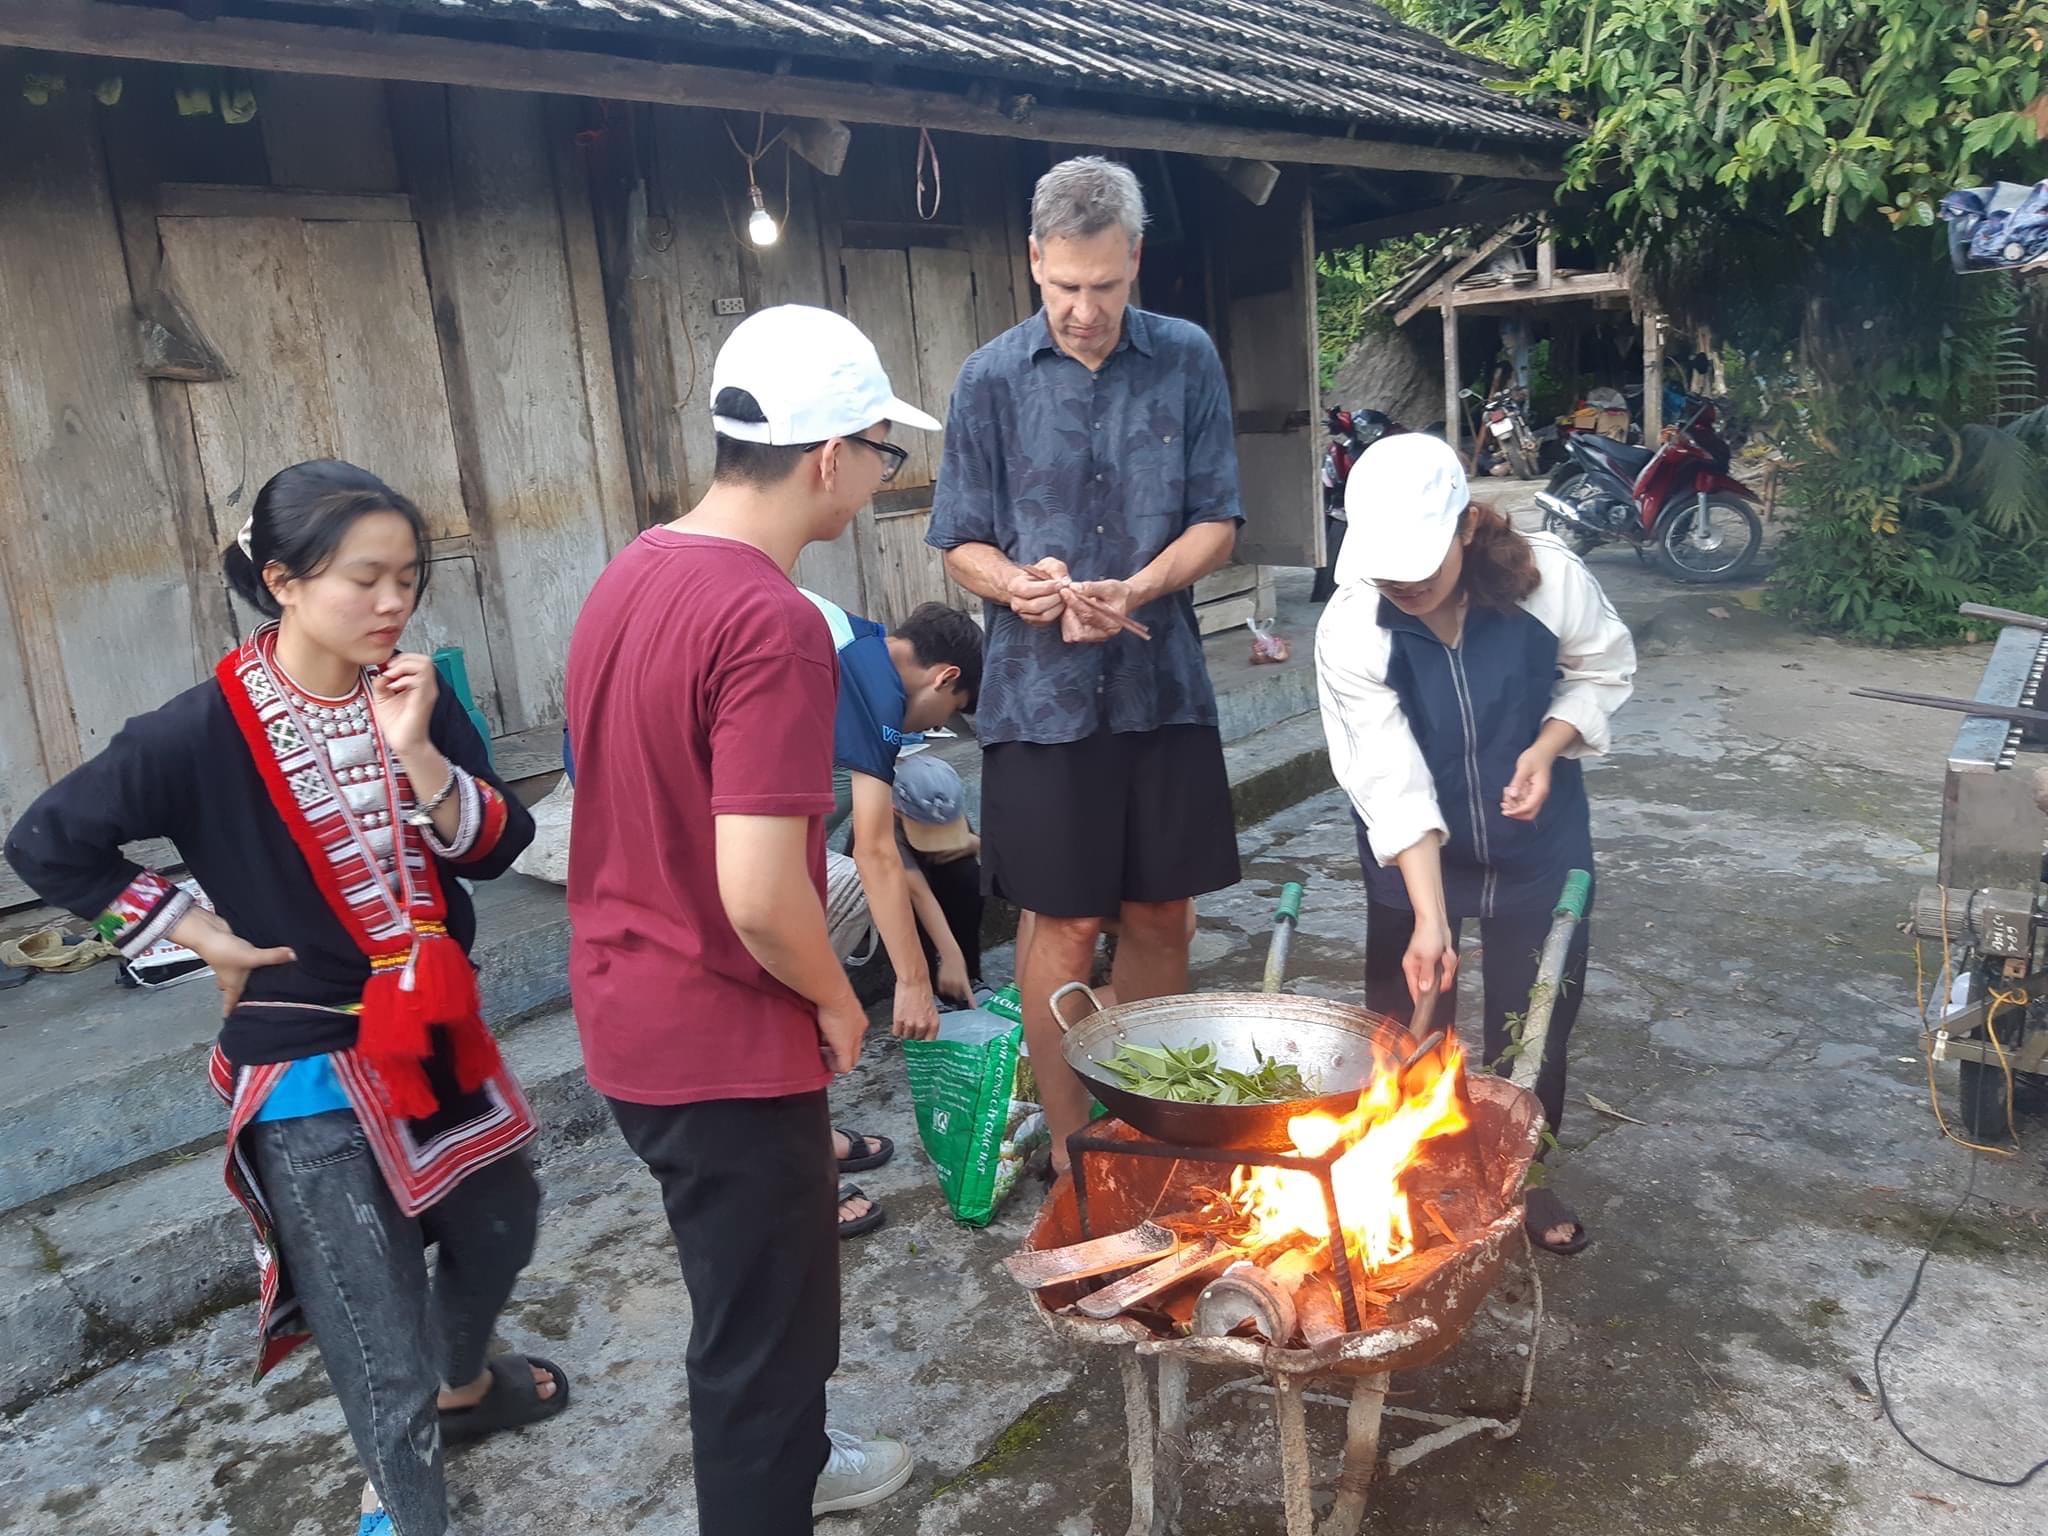 While staying with the locals in Hoang Su Phi, my friend Dave and I learned how to pick and stir-fry tea with the Dao people.